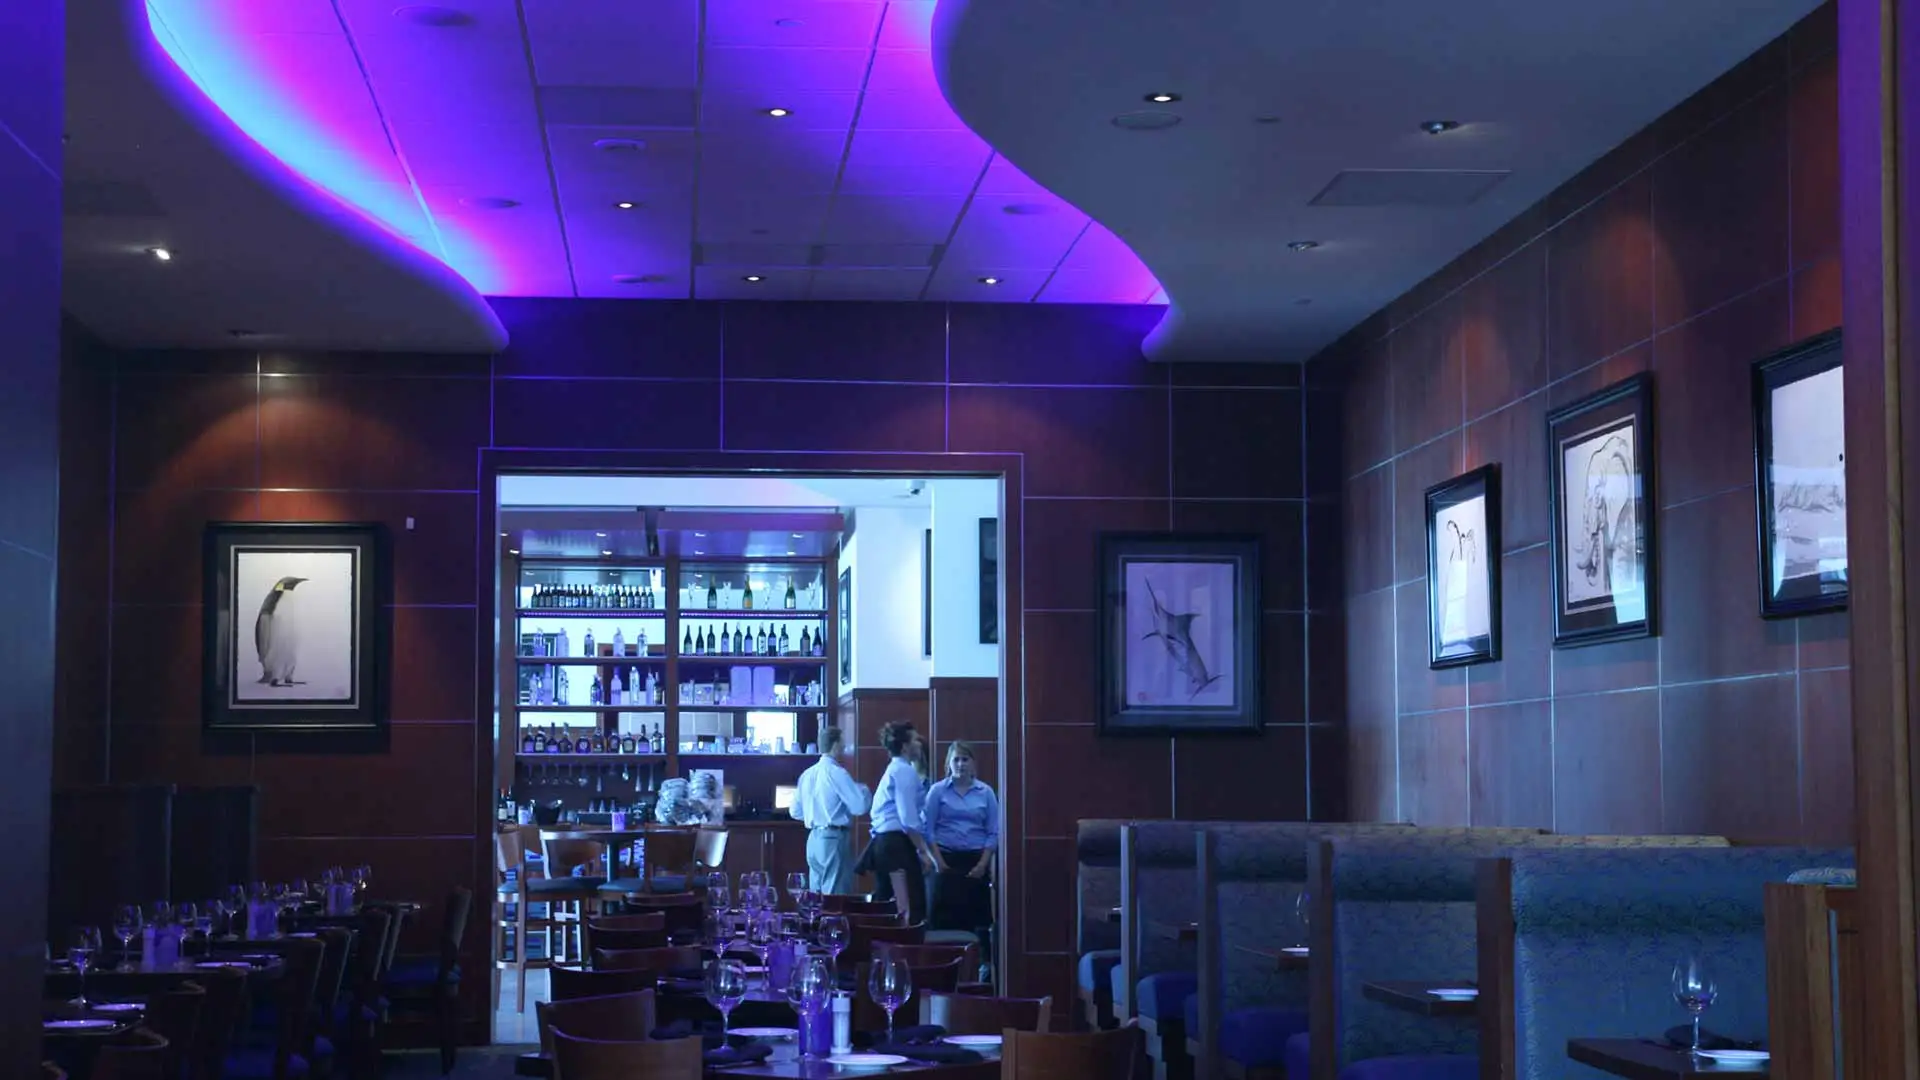 Photo of the VIP dining area in a restaurant with custom neon lighting.